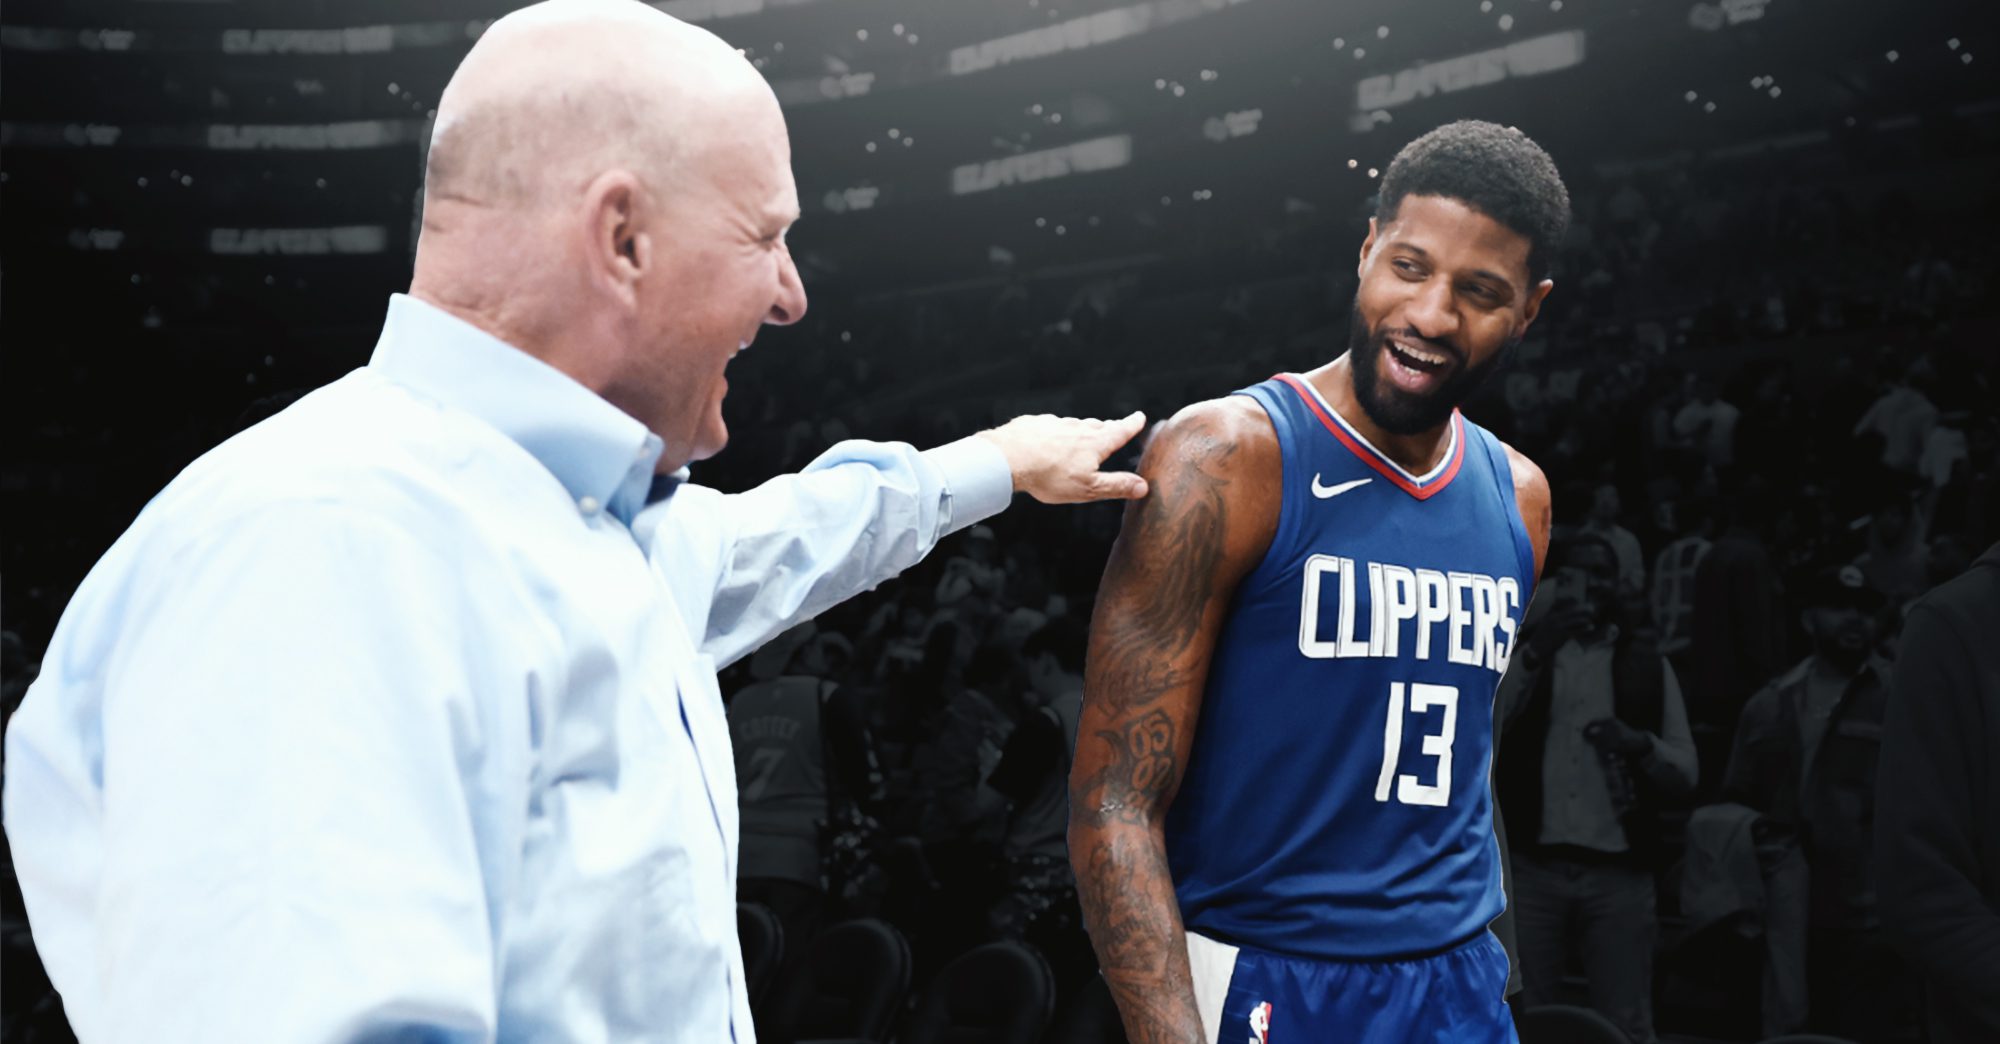 Clippers Owner on Losing Paul George: ‘He Wanted to Go’